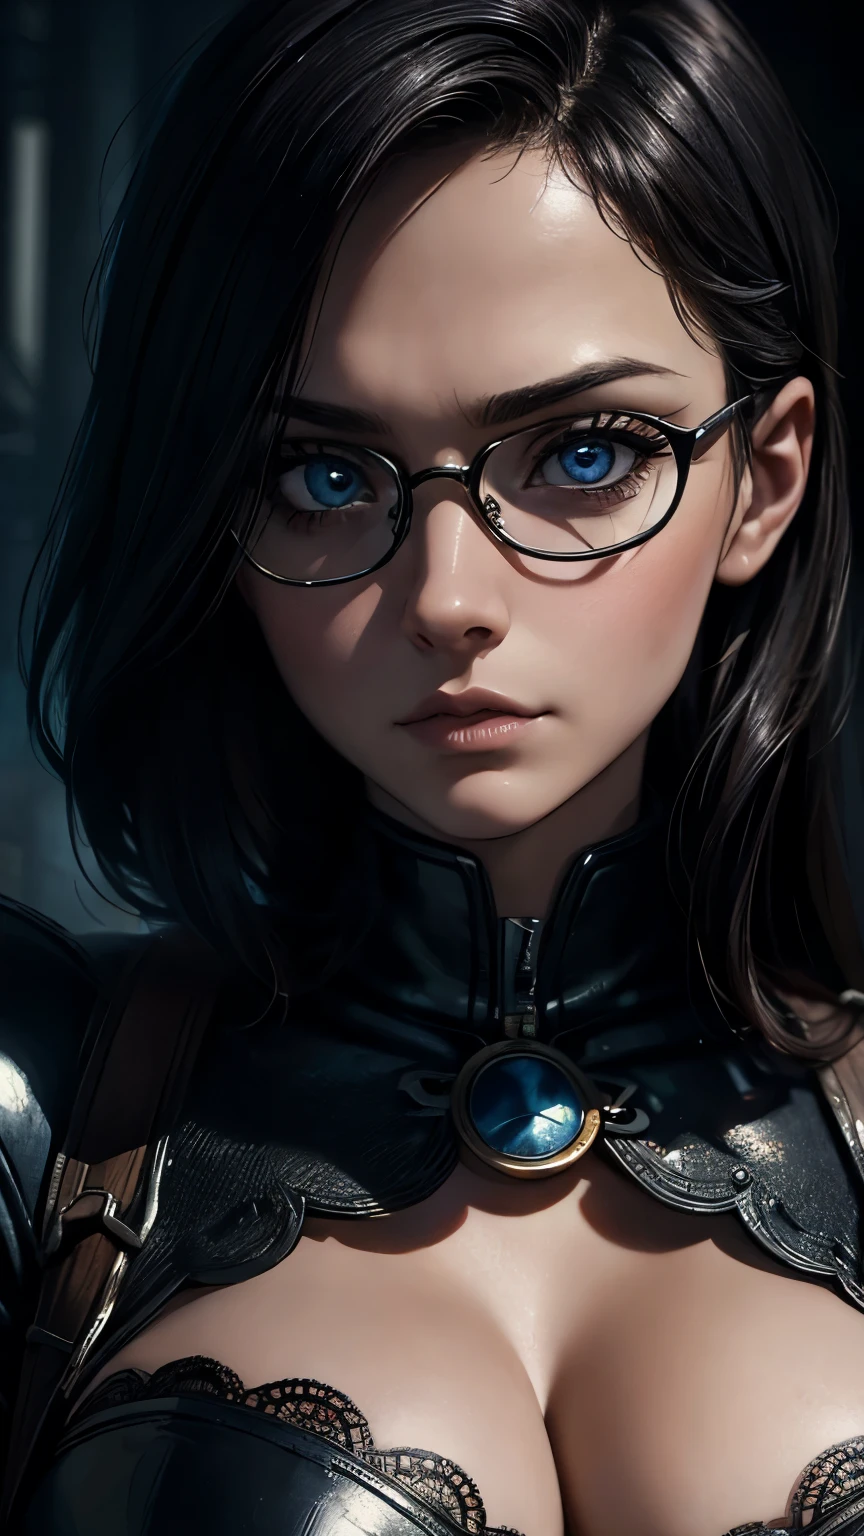 (masterpiece), best quality, expressive eyes, perfect face, detailed eyes, dark fantasy, Margot, dystopian world, dystopian warrior, cleavage, massive snoopy breast, badass woman, sensual , closeup portrait, glasses